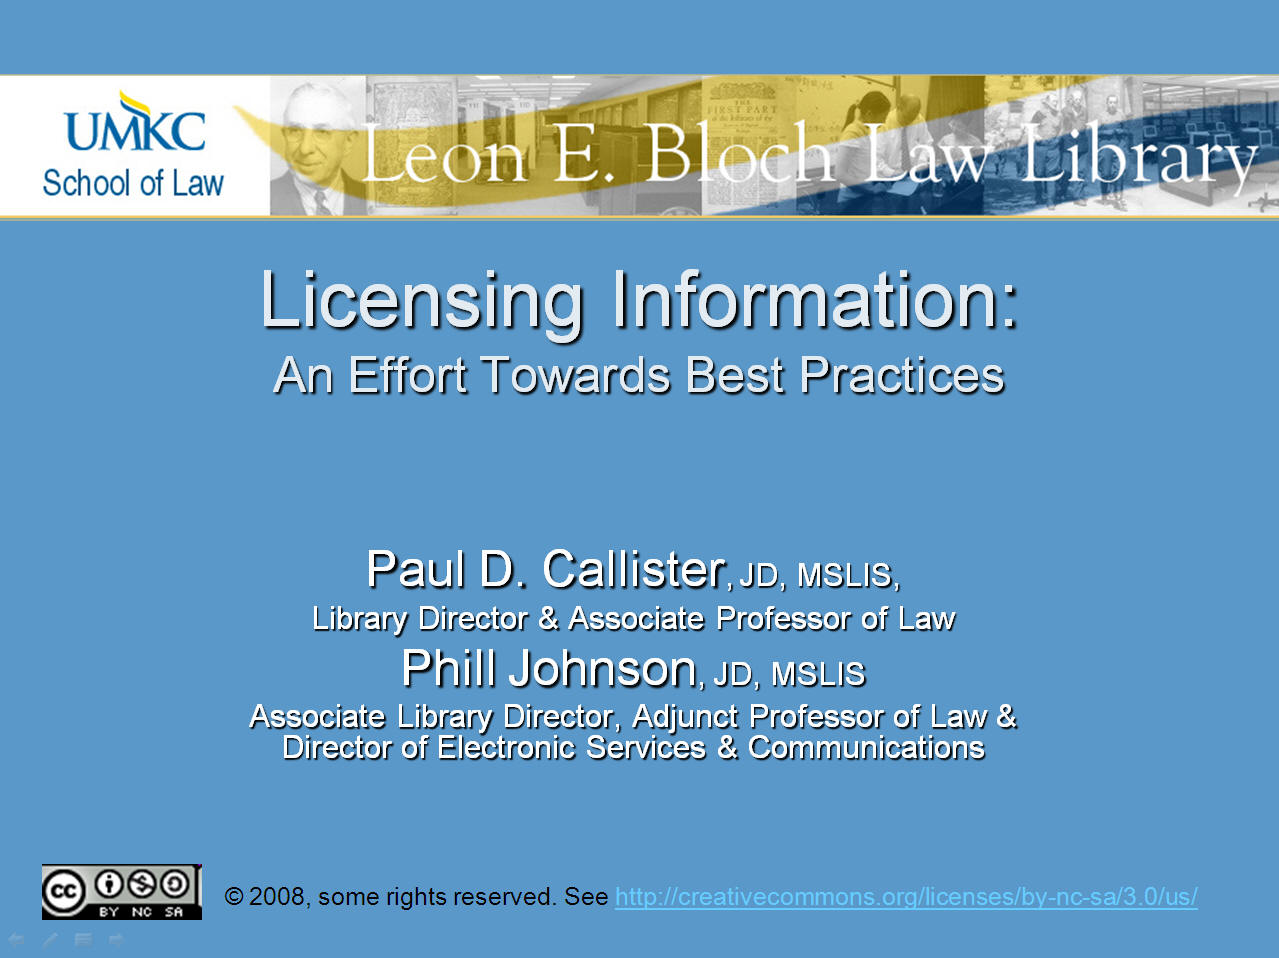 Download licensing practices ppt.